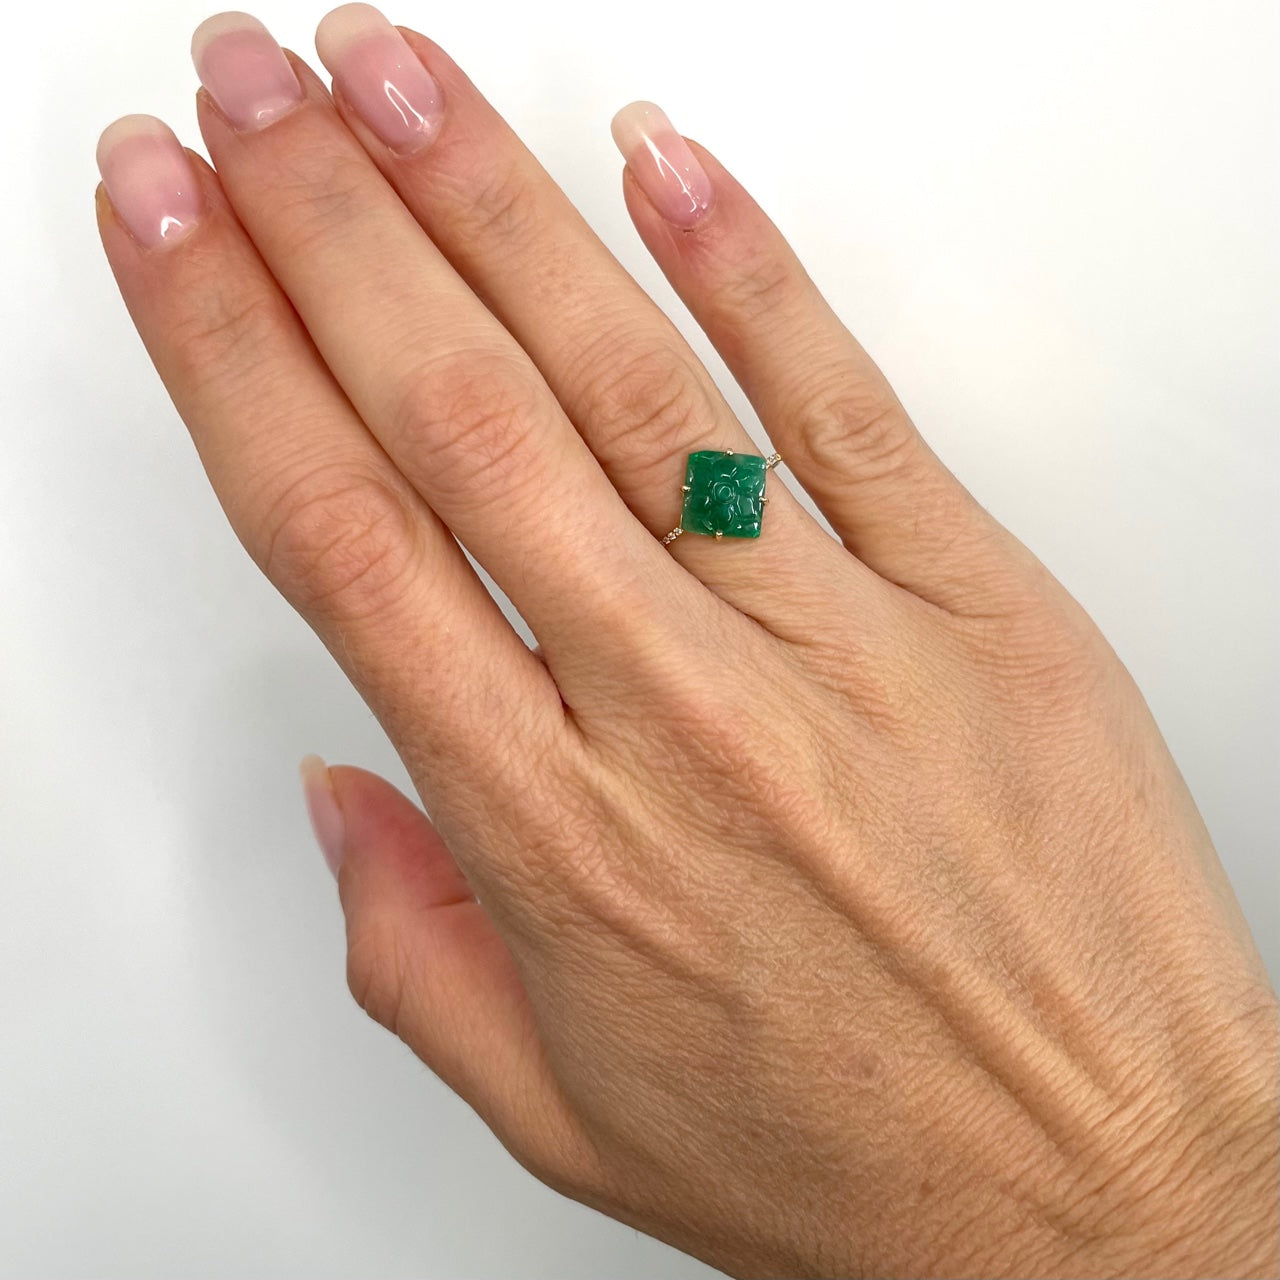 Carved Emerald Flower Diamond Pave Ring